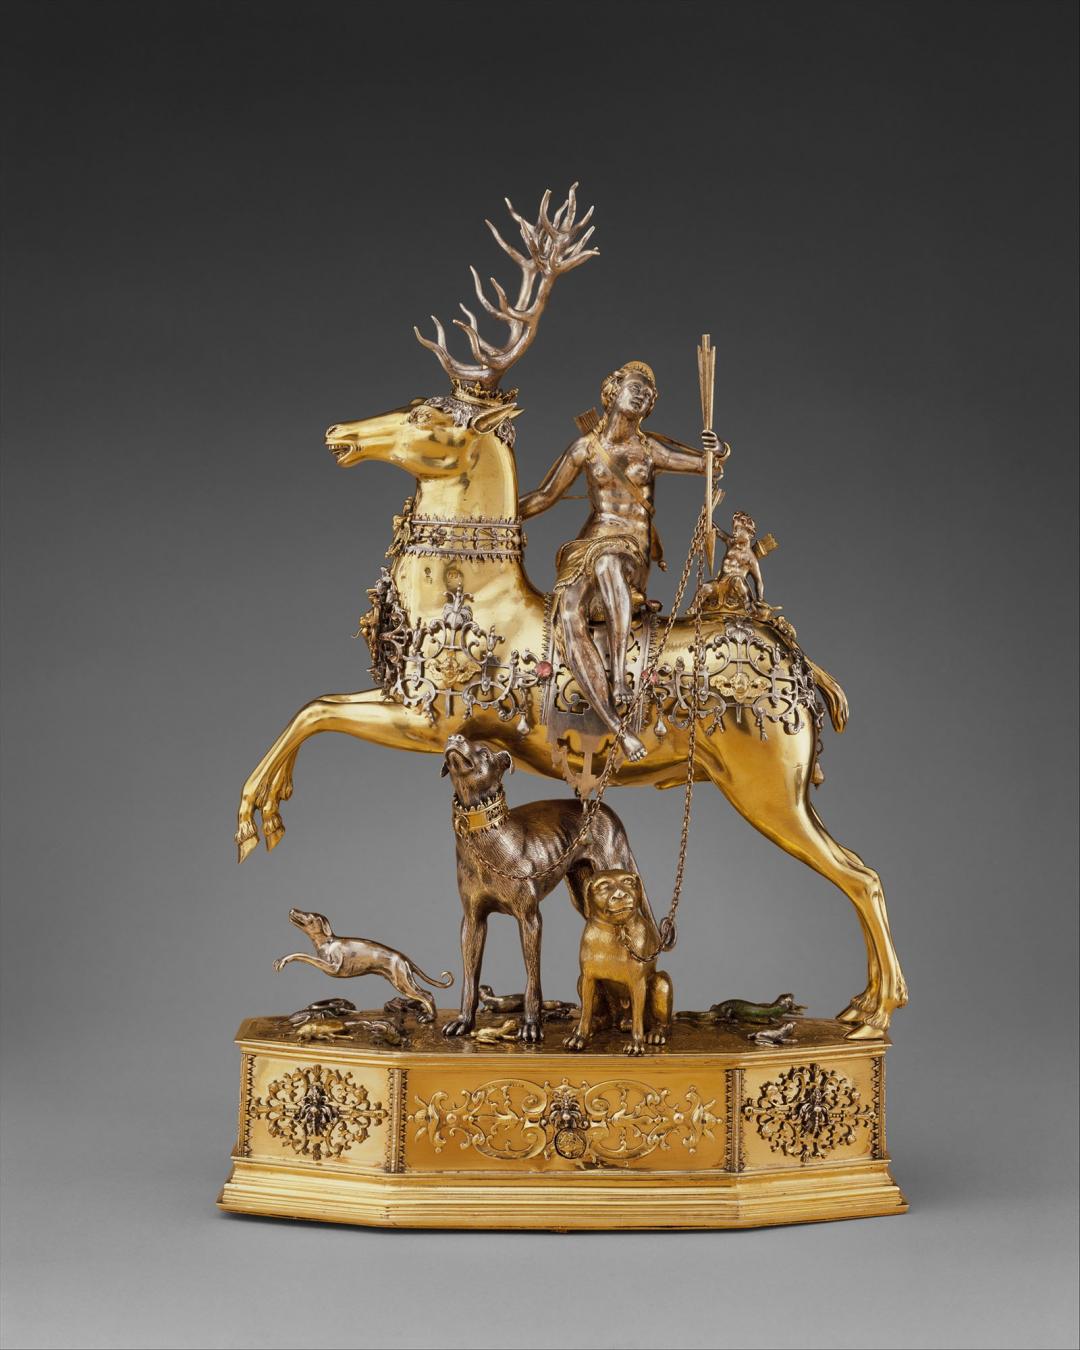 Joachim Friess (attributed), Diana and the Stag Automaton, 1620